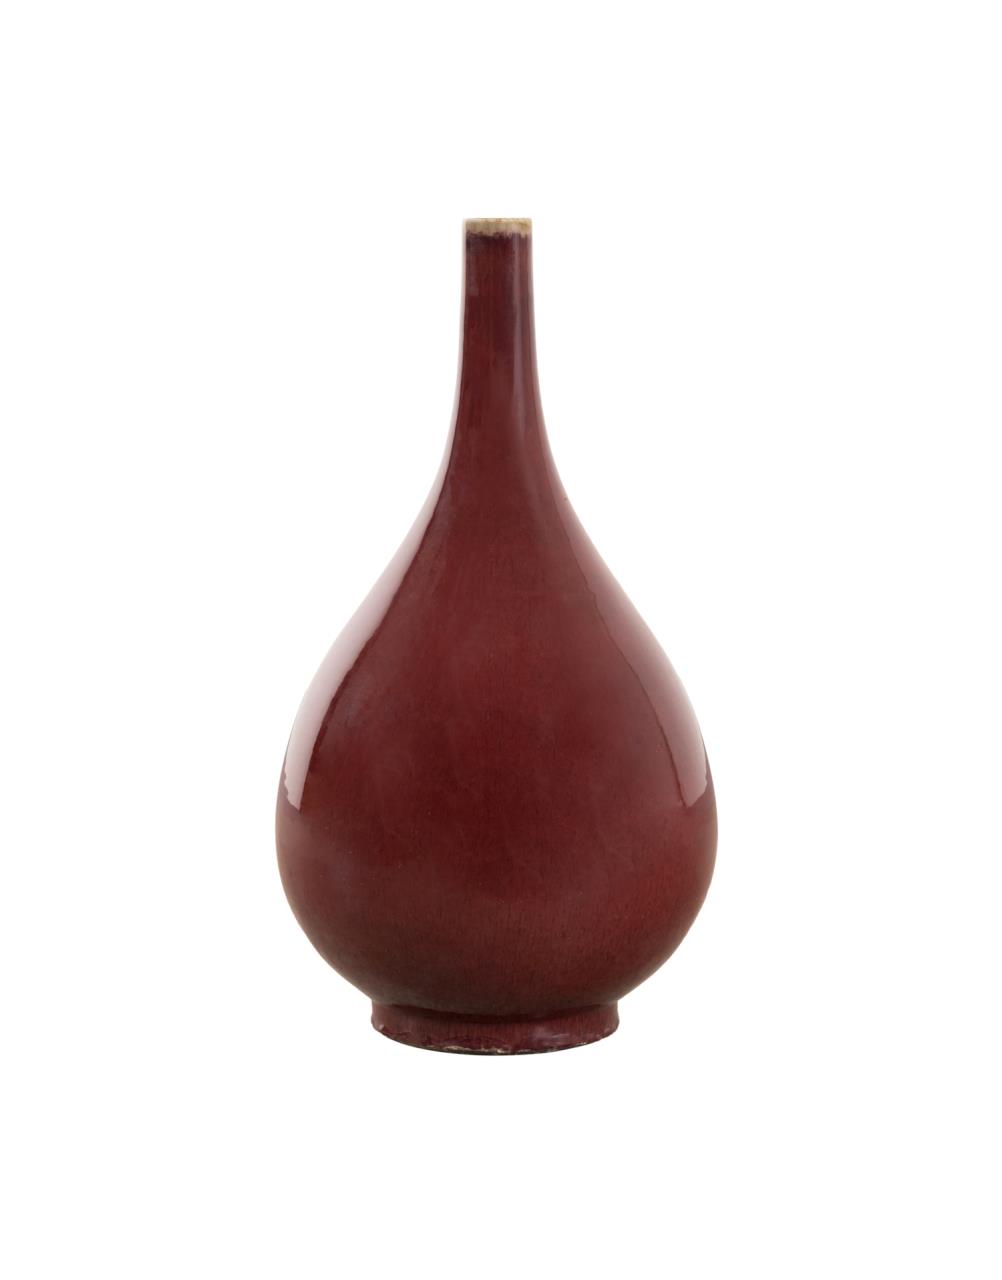 LARGE CHINESE RED FLAMBE BOTTLE 2f94de